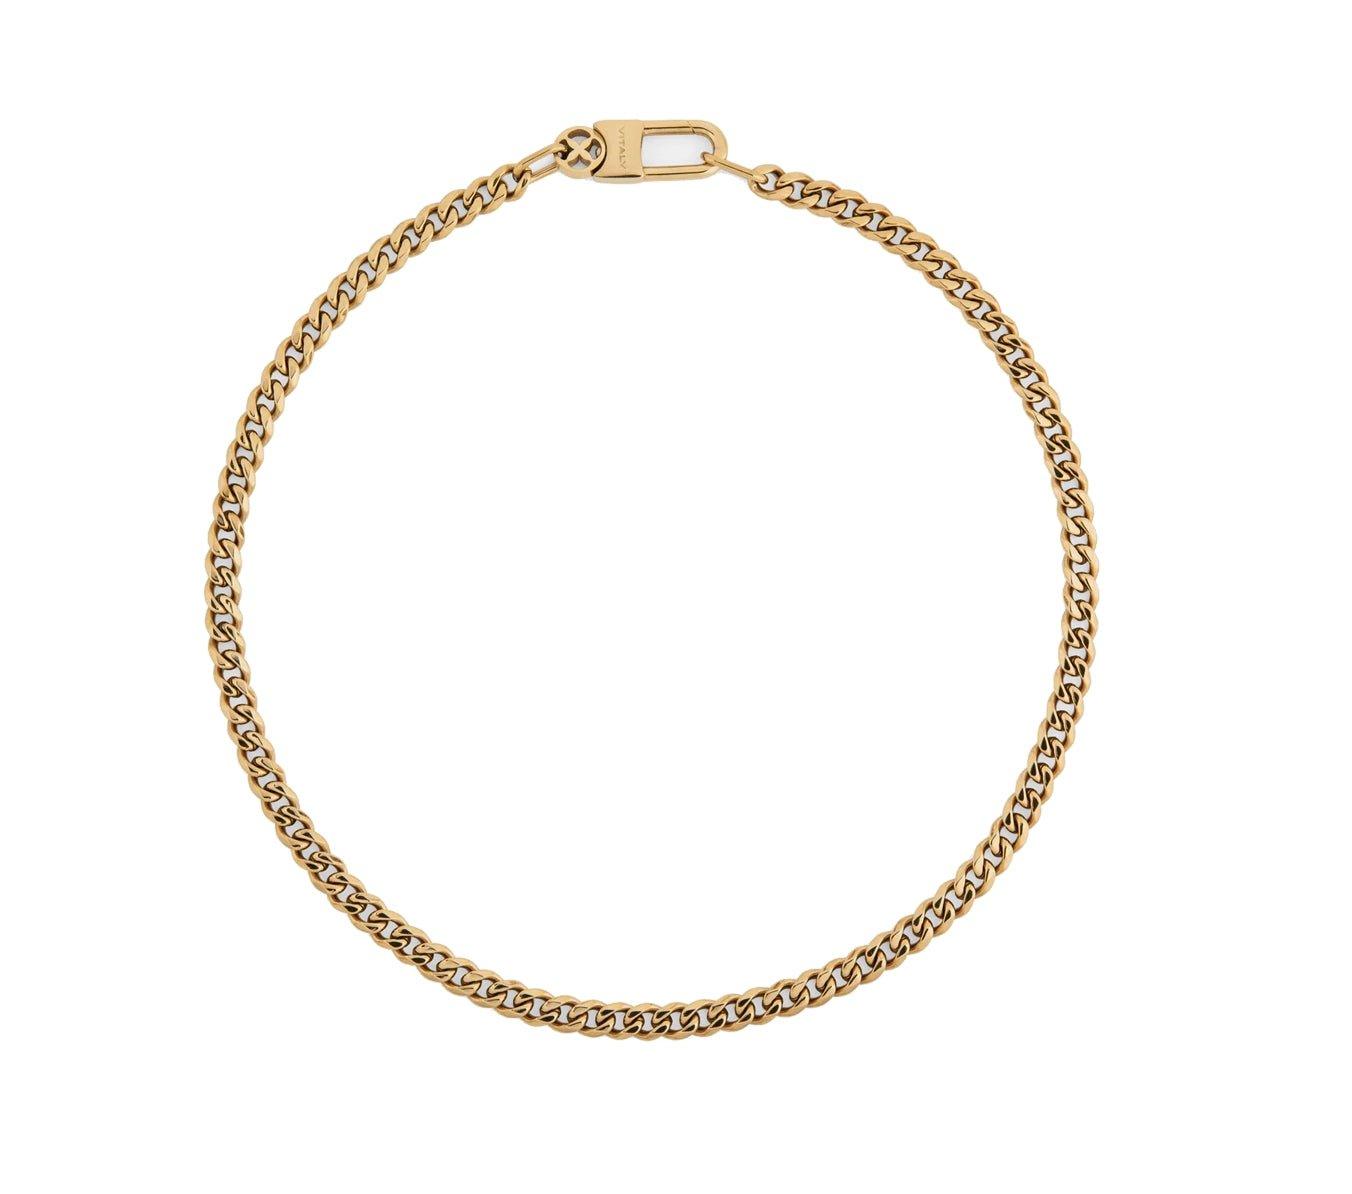 VITALY Omnia Gold Necklace - SUPERCONSCIOUS BERLIN